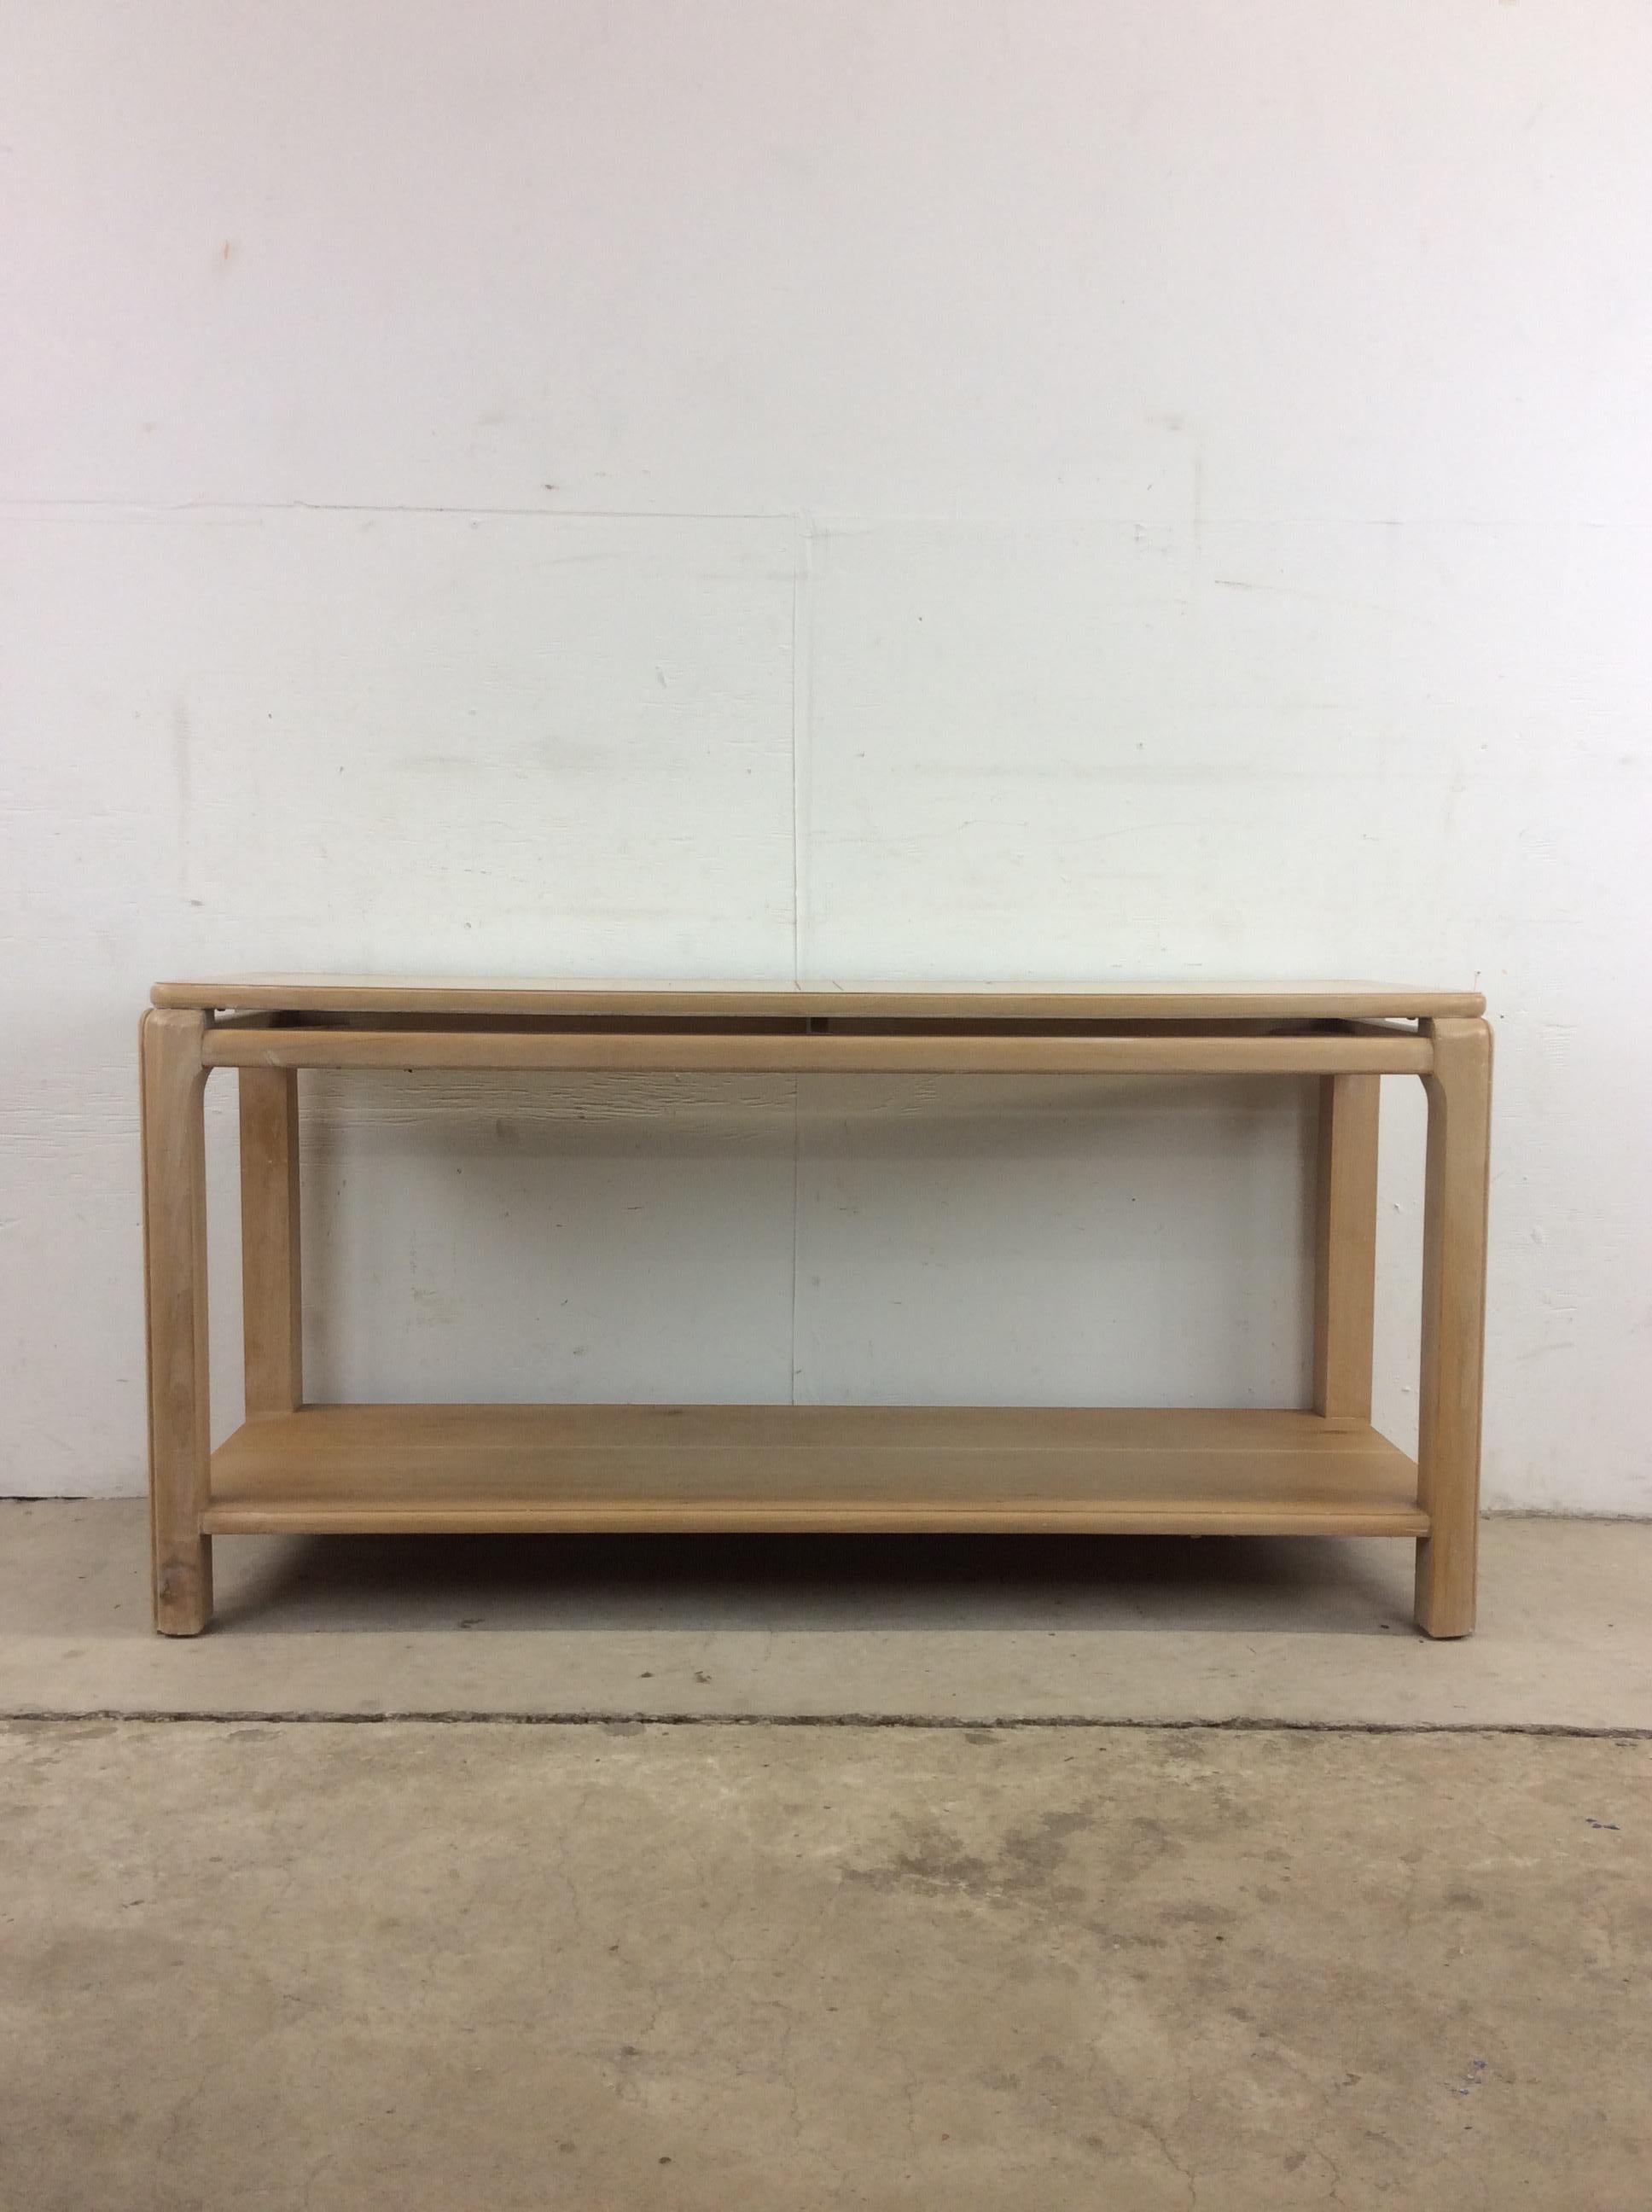 This vintage postmodern console table by Lane Furniture features hardwood construction with a light washed Burlwood finish. Plenty of surface area up top for knick knacks and still more space below on the opened shelving.

Dimensions: 53w 18d